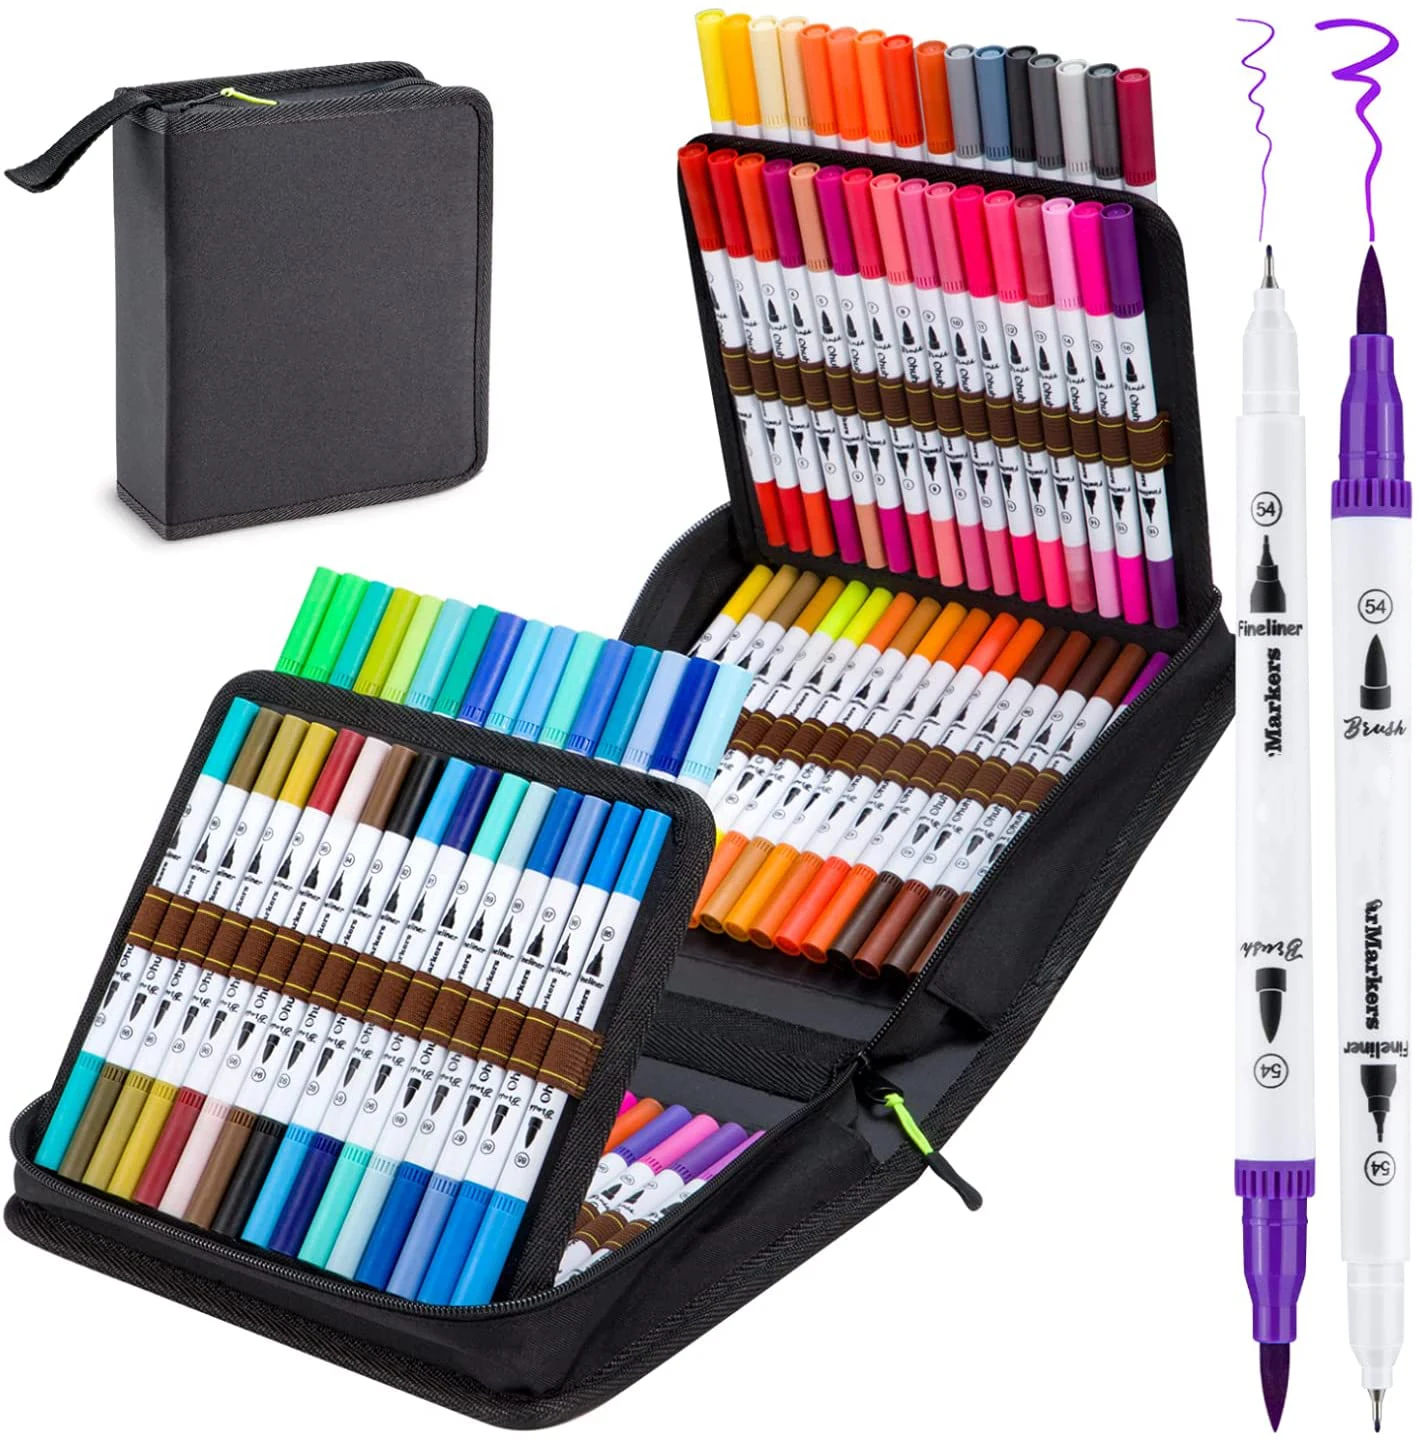 

120 Coloring Drawing Art Markers Set, Dual Tip Fineliners Bullet Pens & Watercolour Brush for Kids Adult Drawing